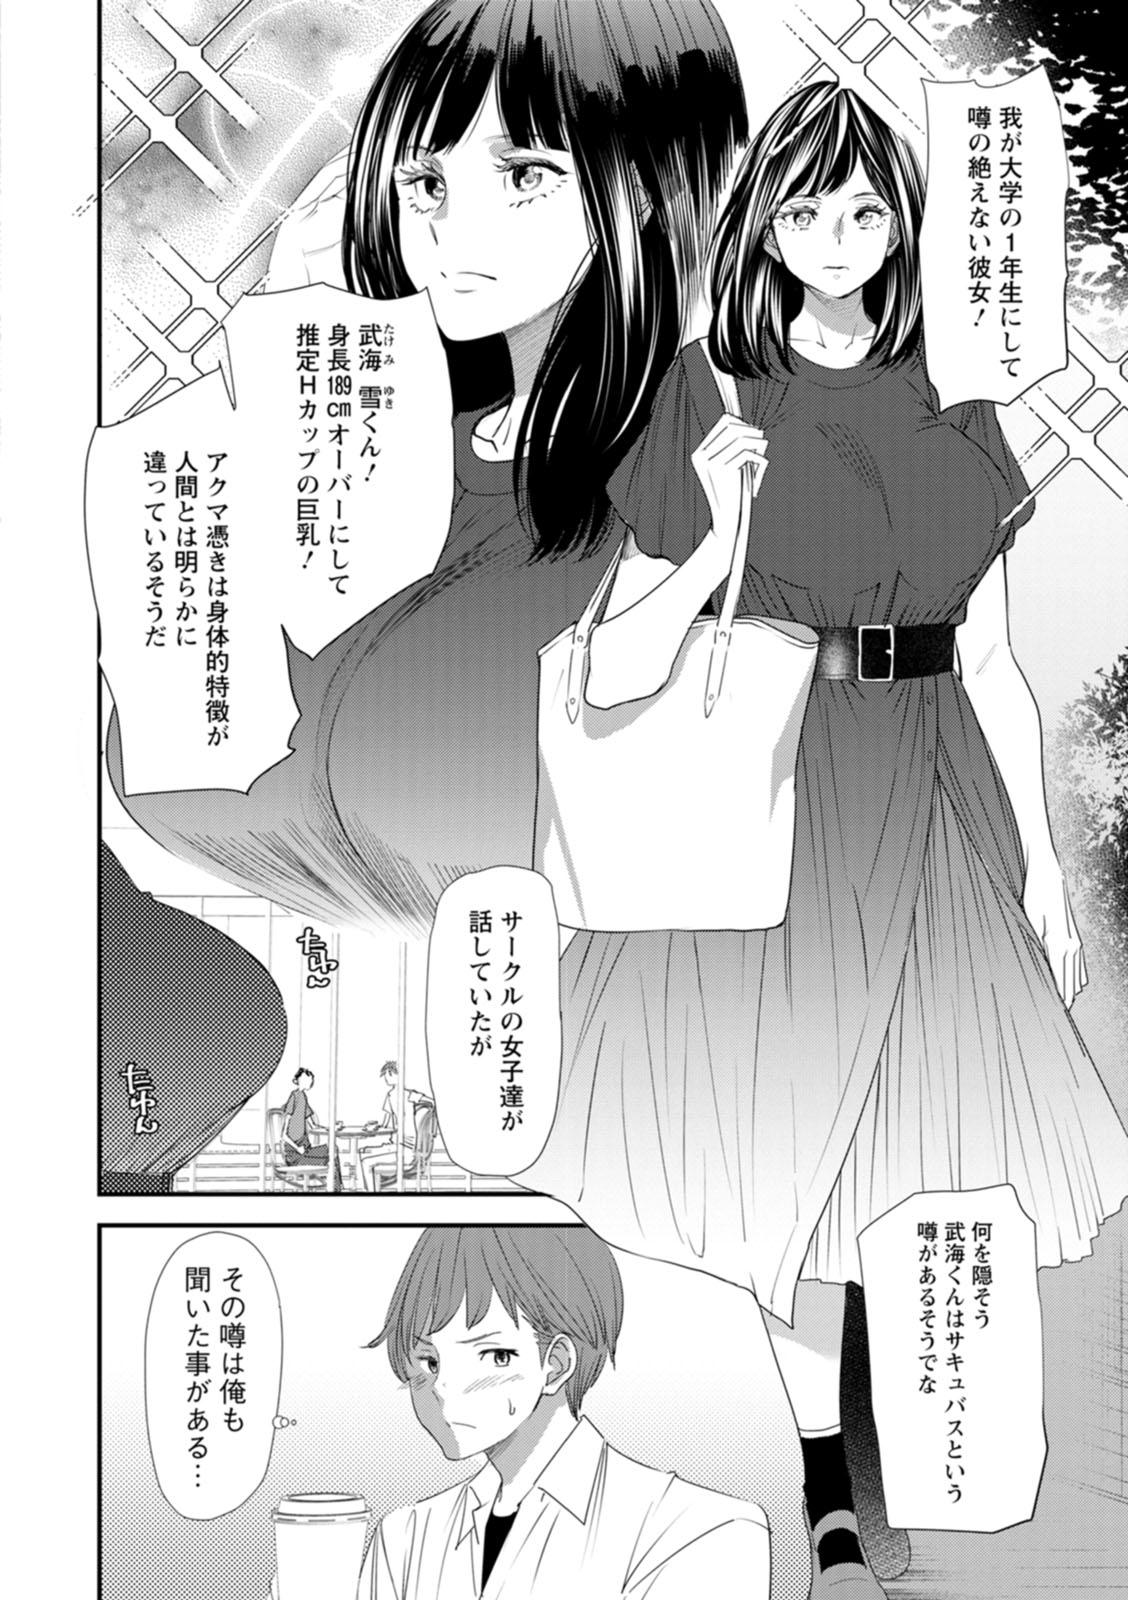 Flash Inma Joshi Daisei no Yuuutsu - The Melancholy of the Succubus who is a college student Cfnm - Page 10